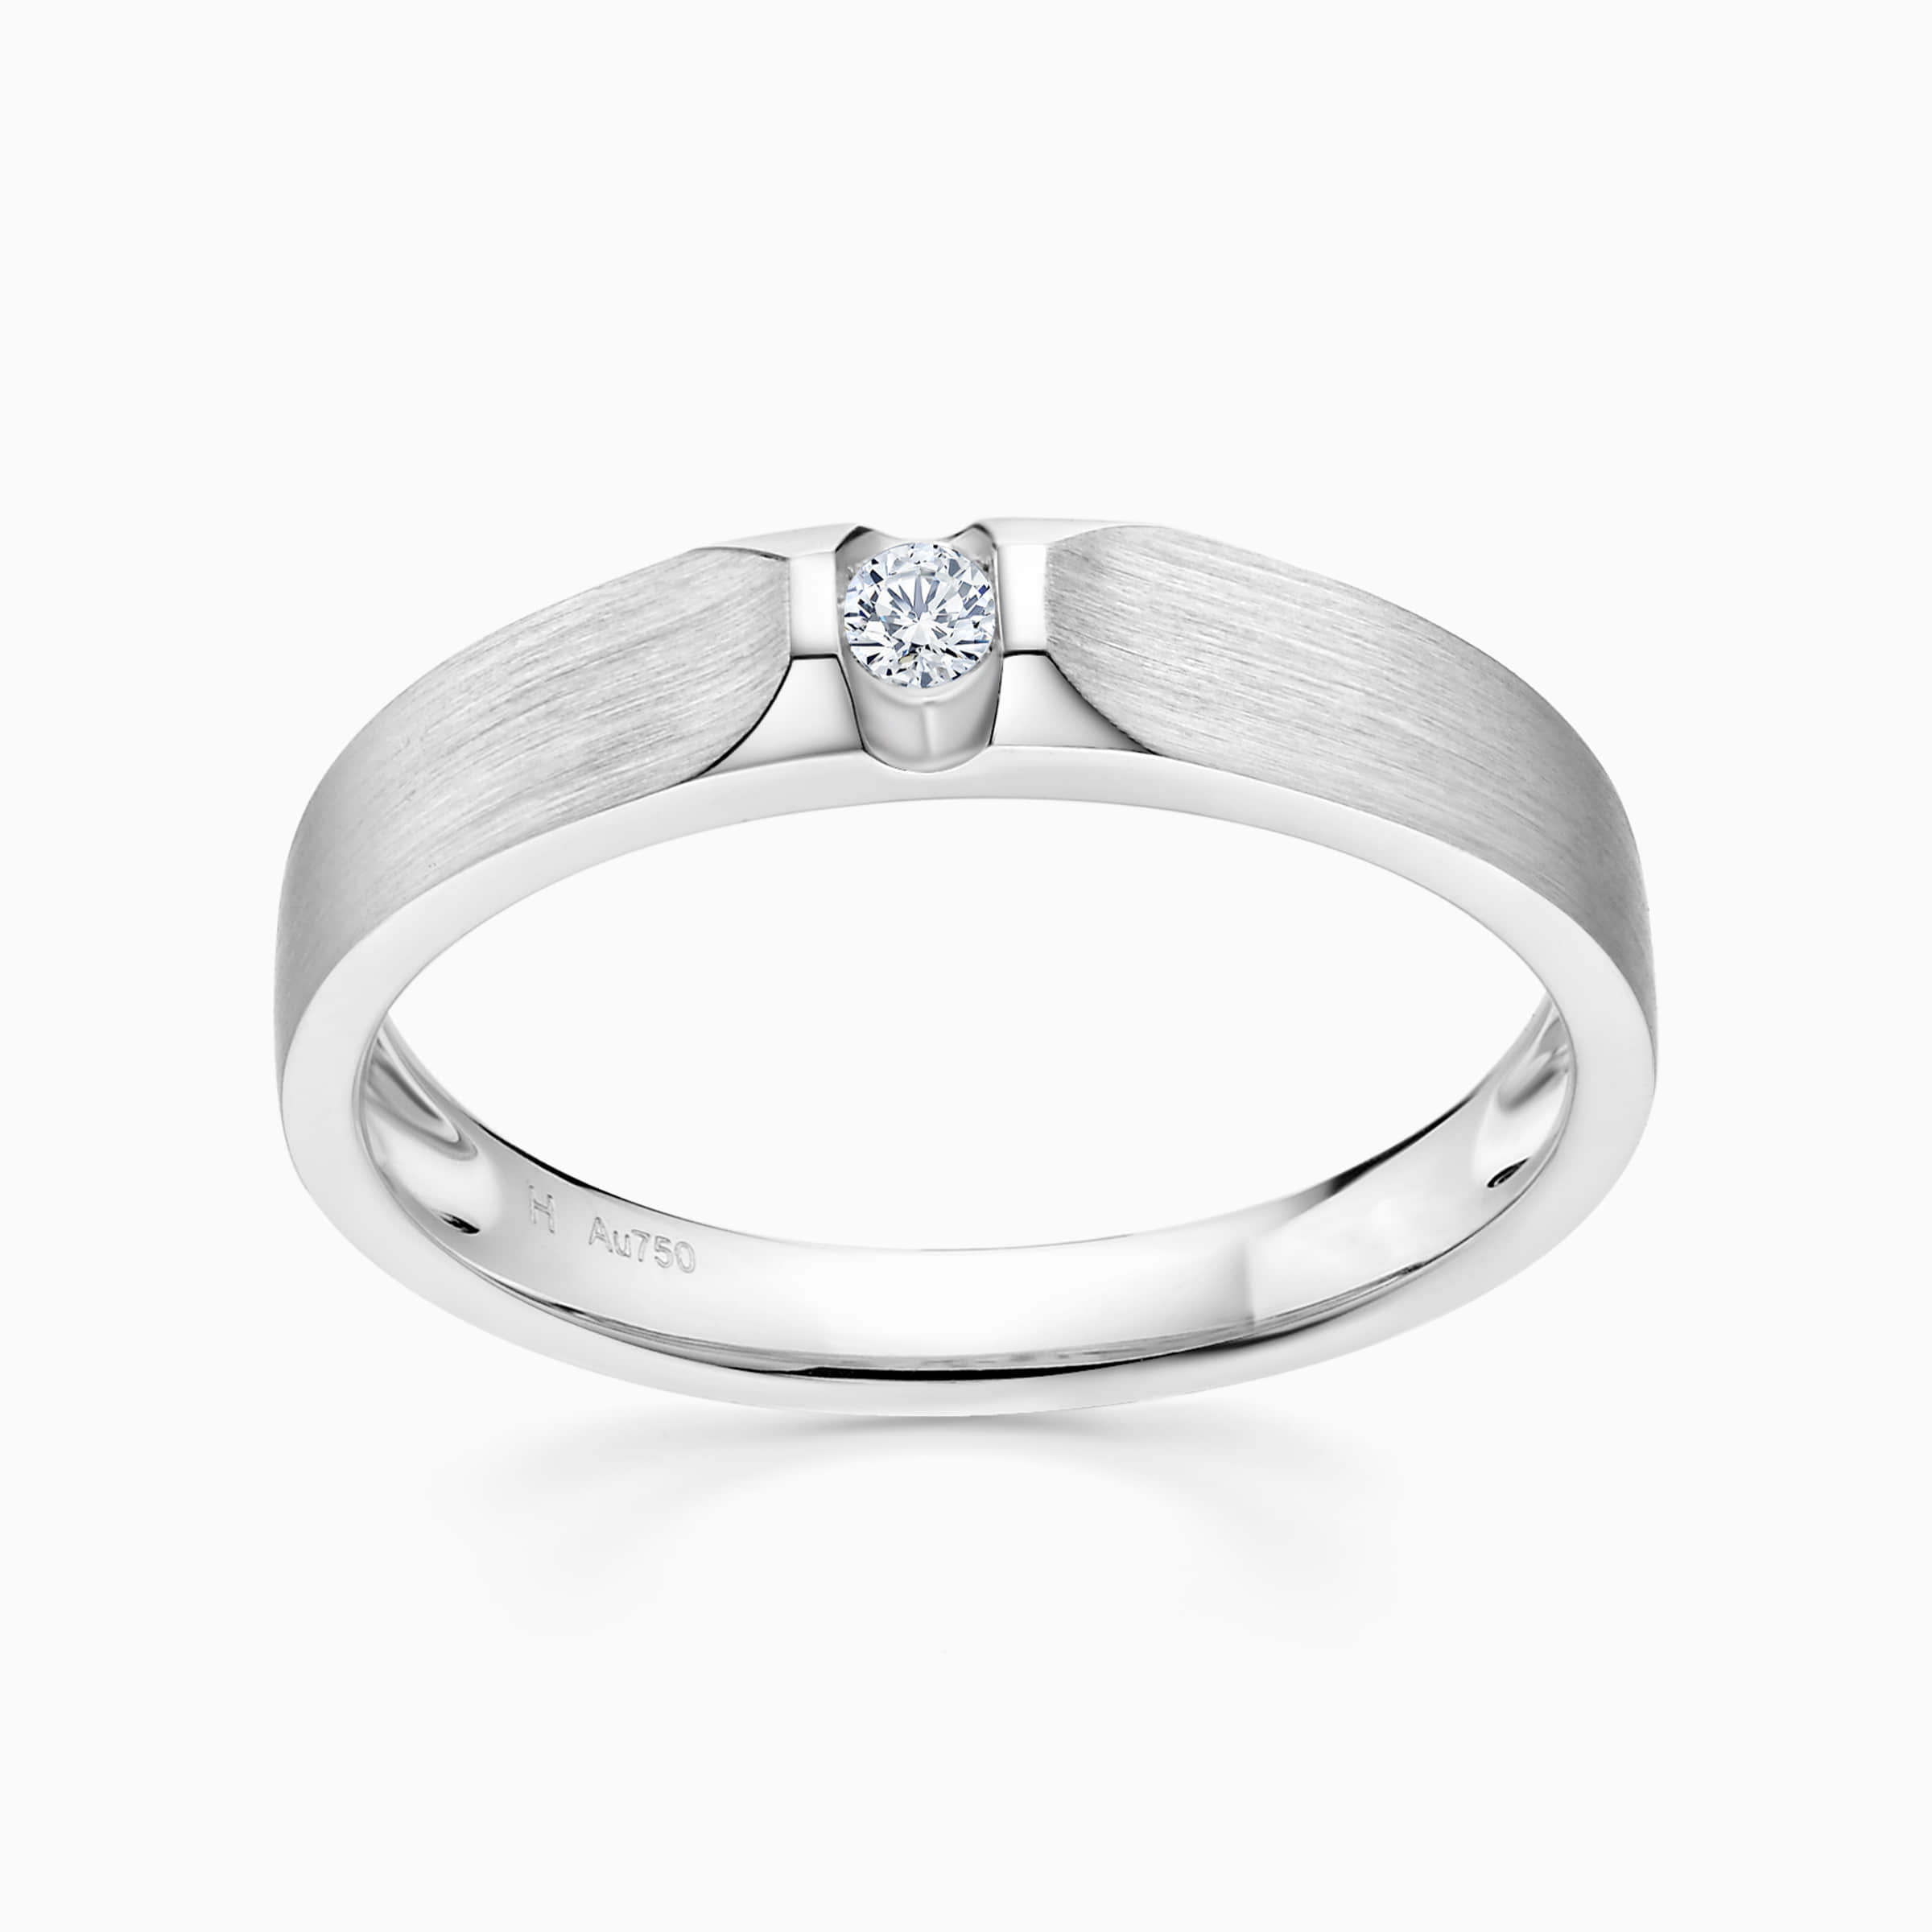 Darry Ring men's ring with brushed finish